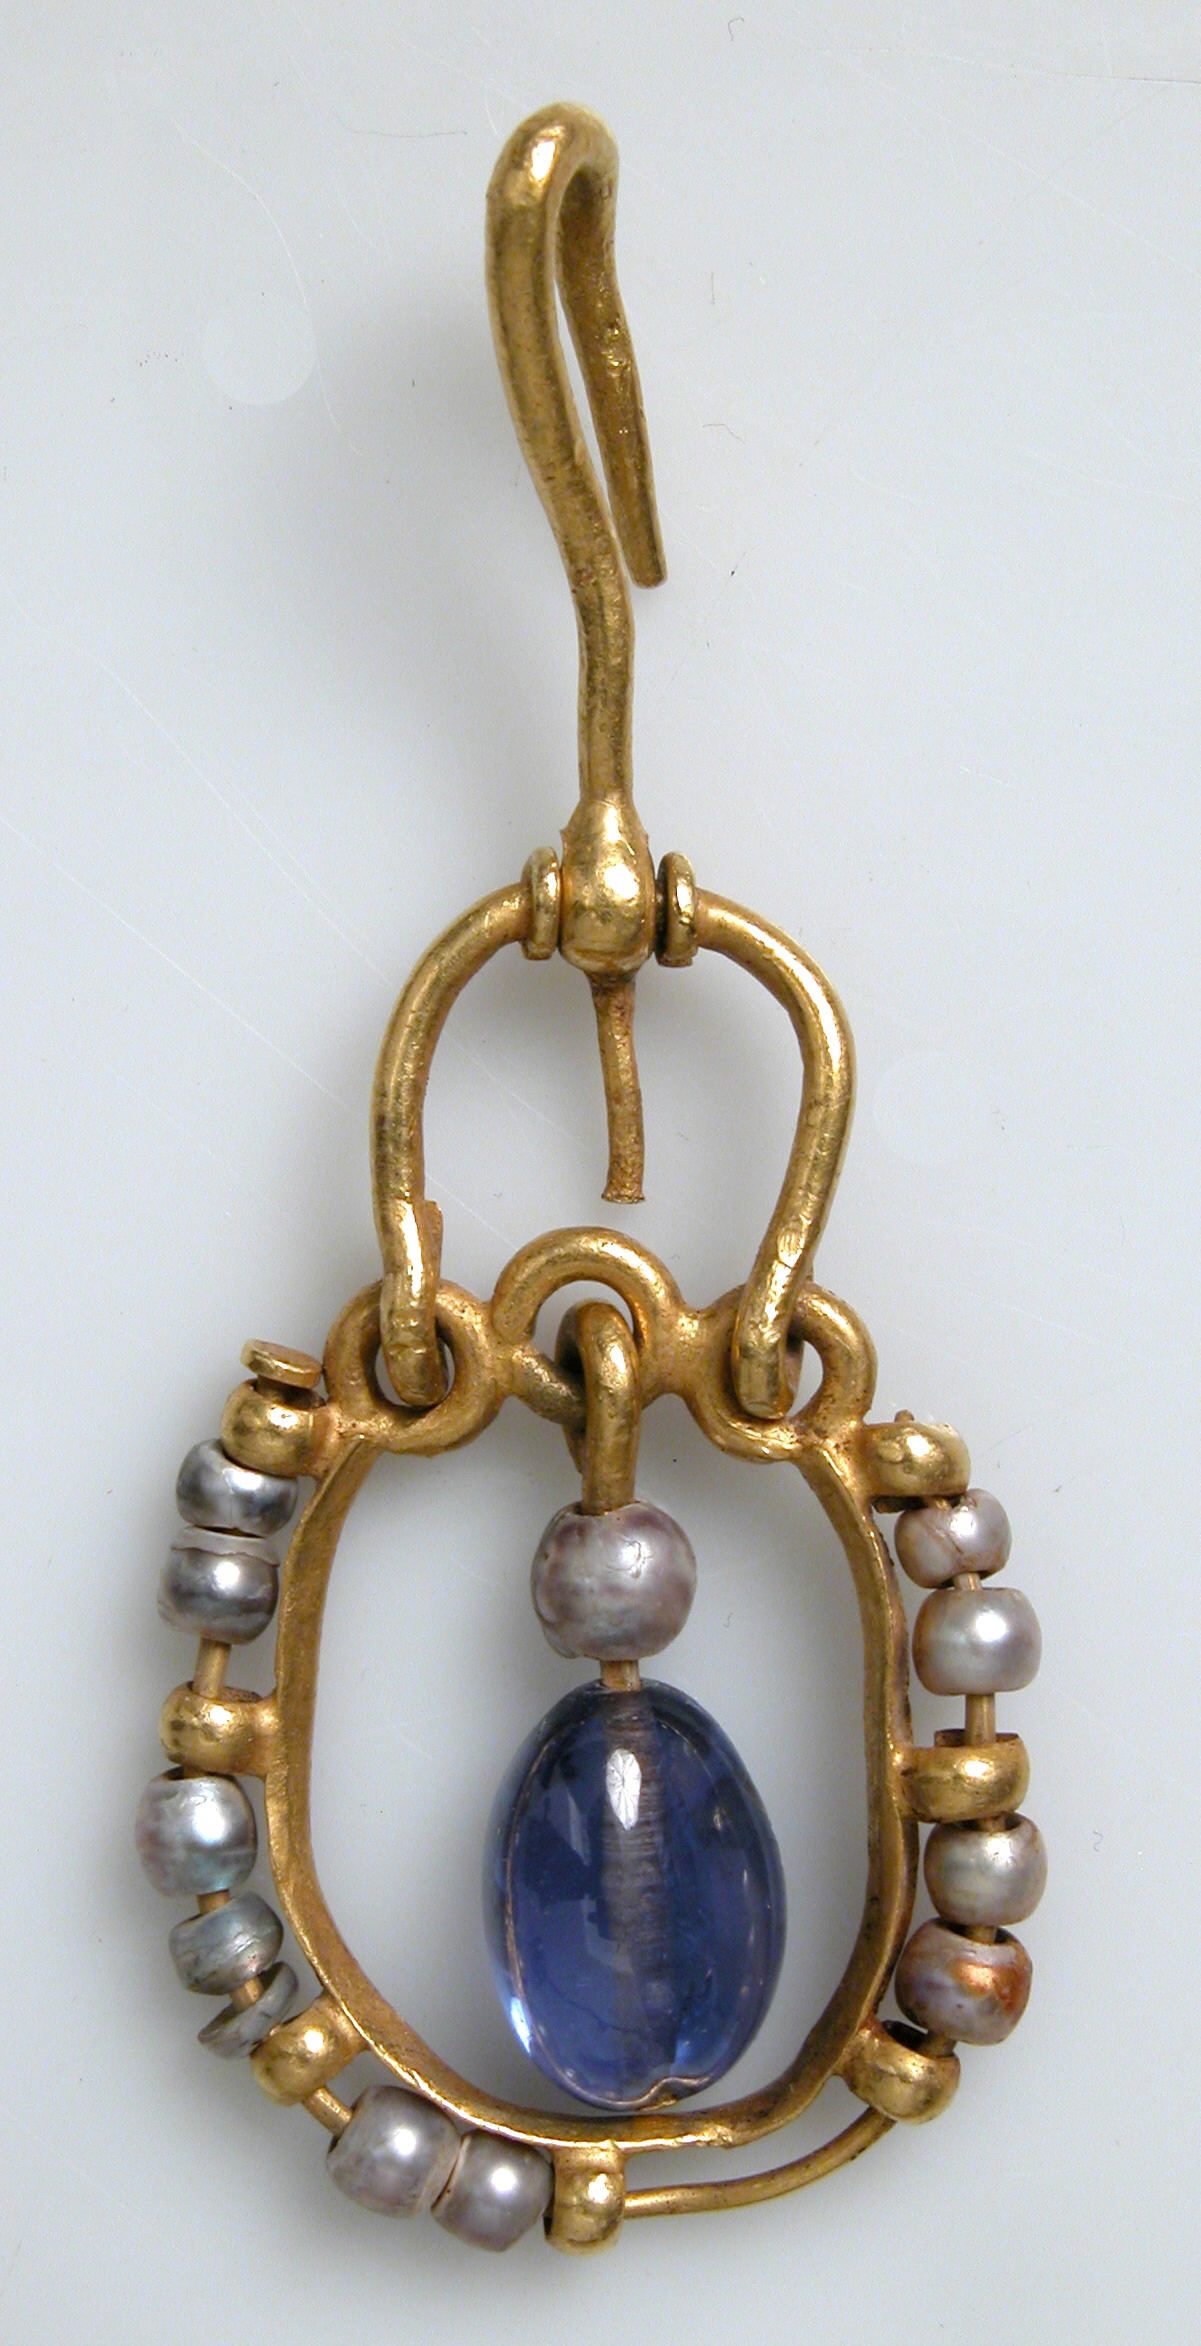 Byzantine sapphire, pearl and gold earring made during the 6th to 7th century. Photo MET Museum